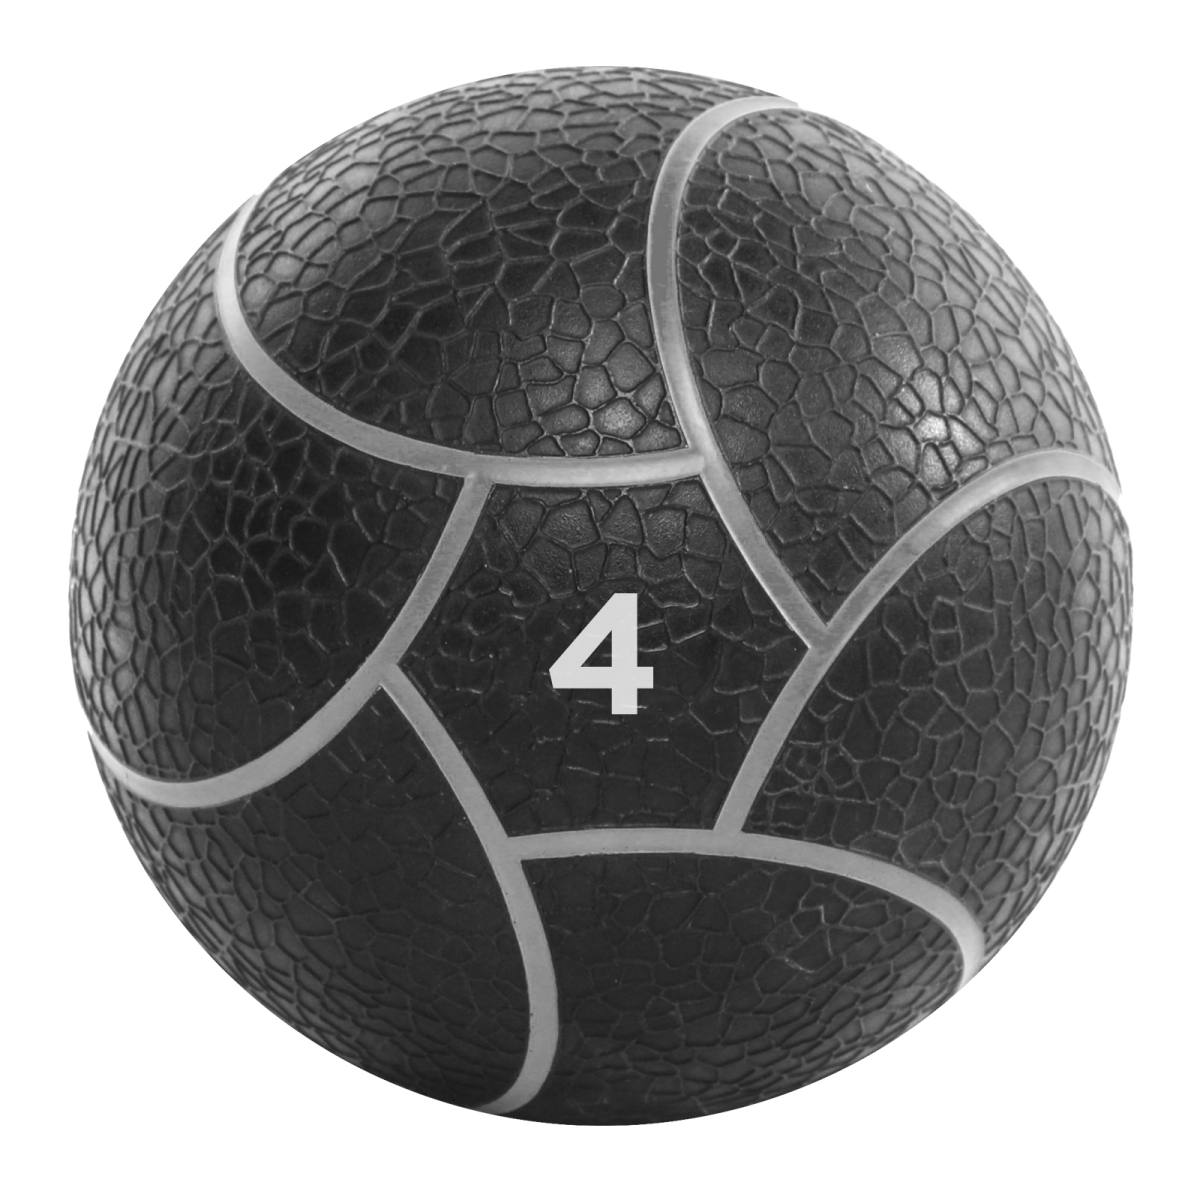 Picture of Power Systems 25704 Elite Power Med Ball Prime 4 lb. Gray